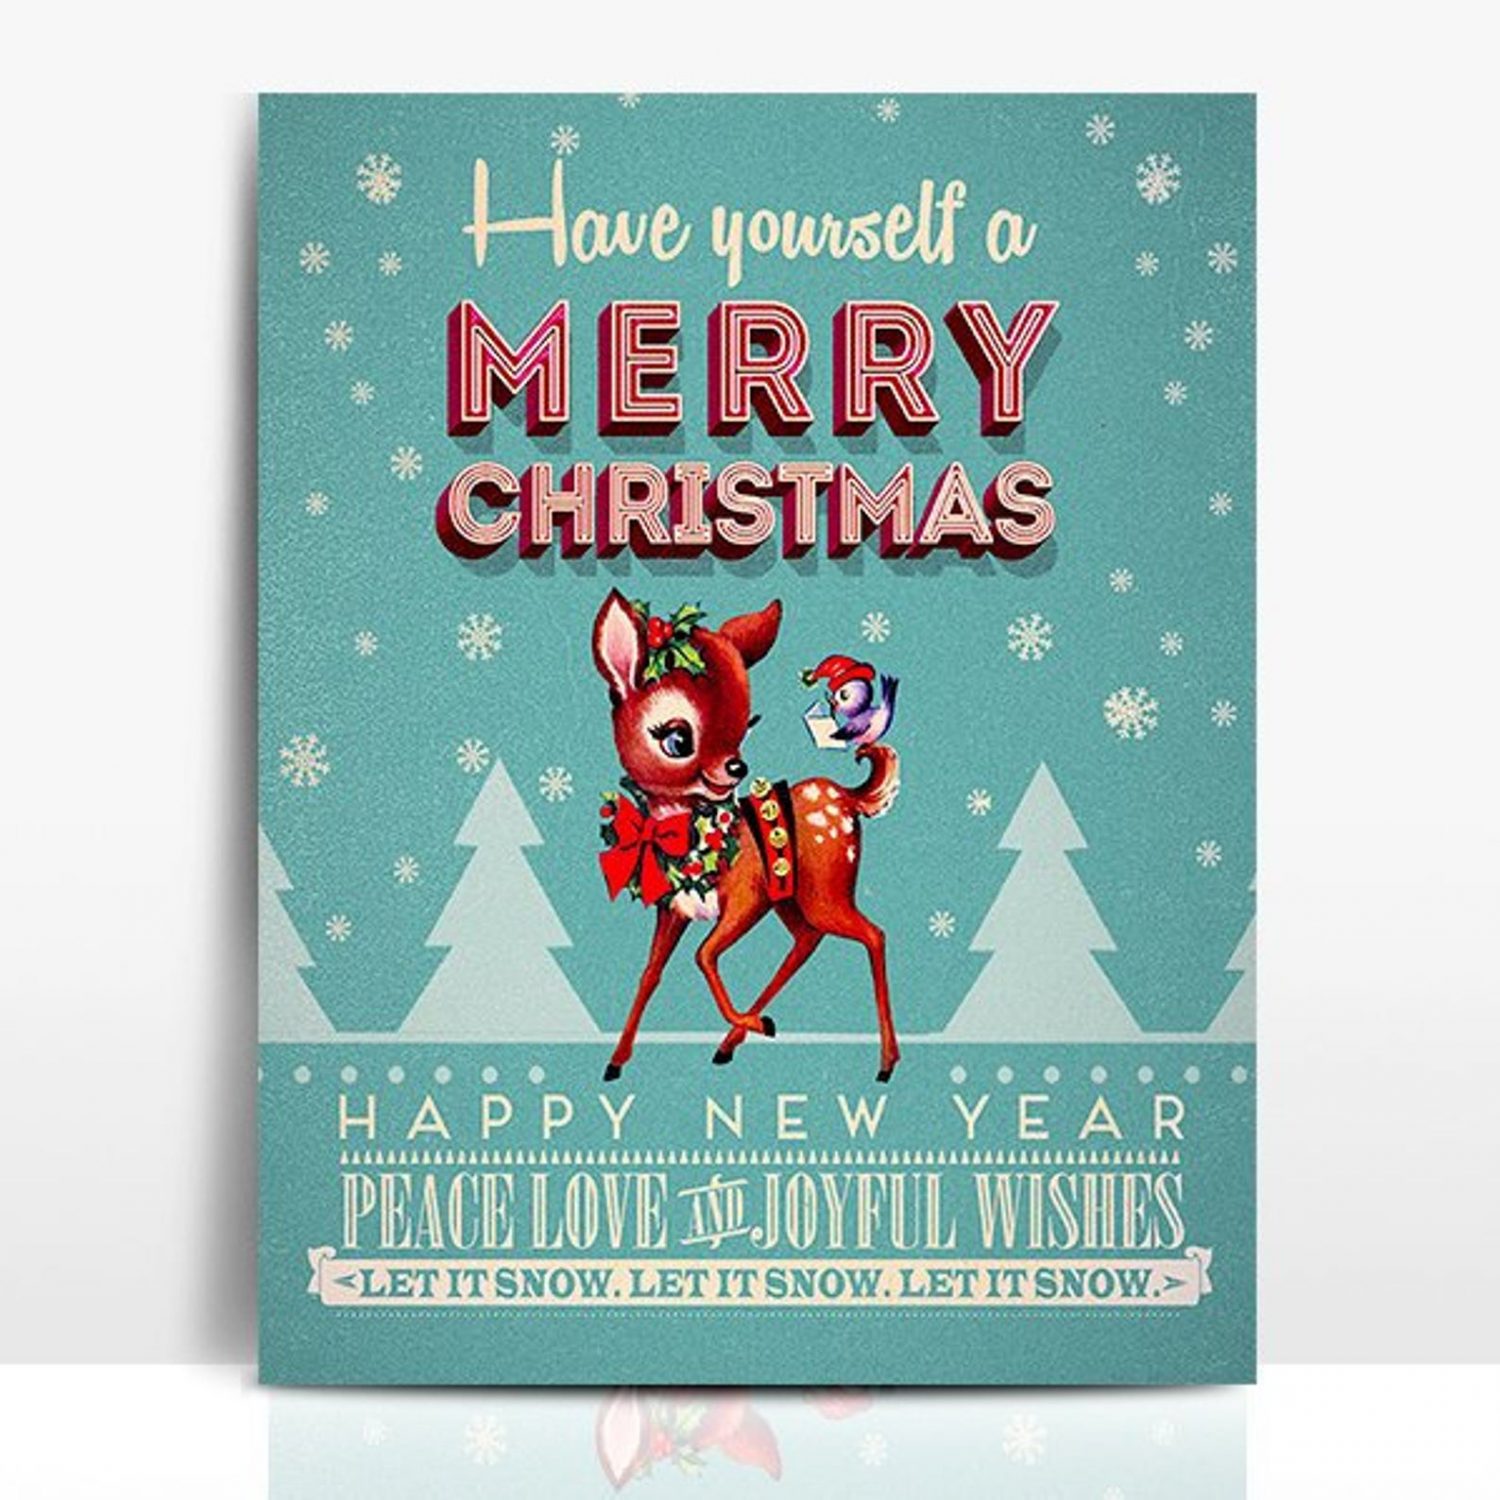 Have Yourself A Merry Christmas-Vintage Reindeer Print, Retro Xmas, Holiday Art, Christmas Wall Decor, Winter, Vintage Style, Wall Art, Gift